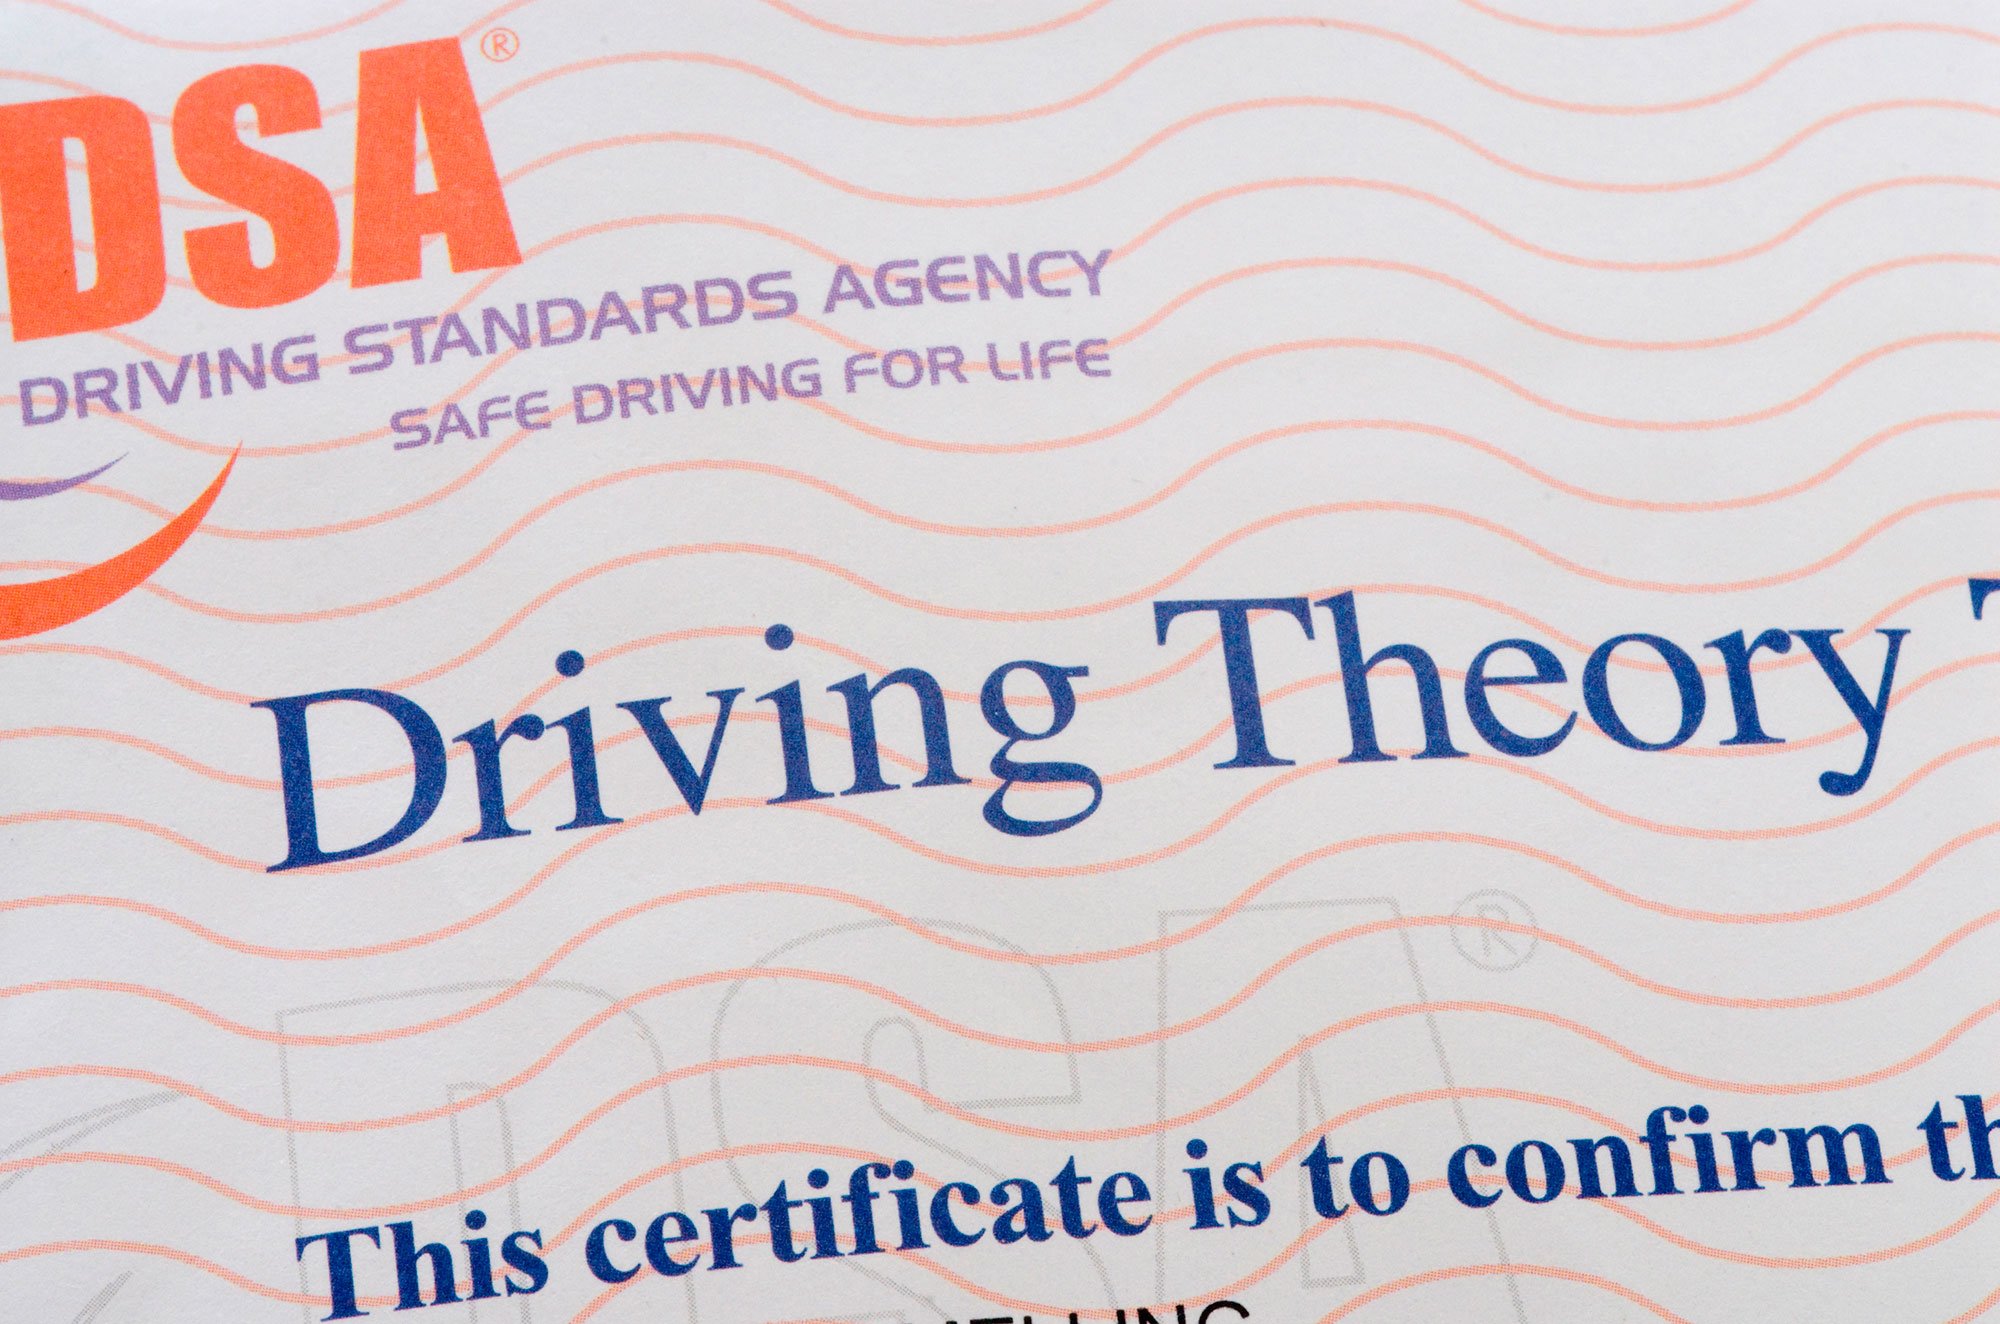 Driving theory certificate